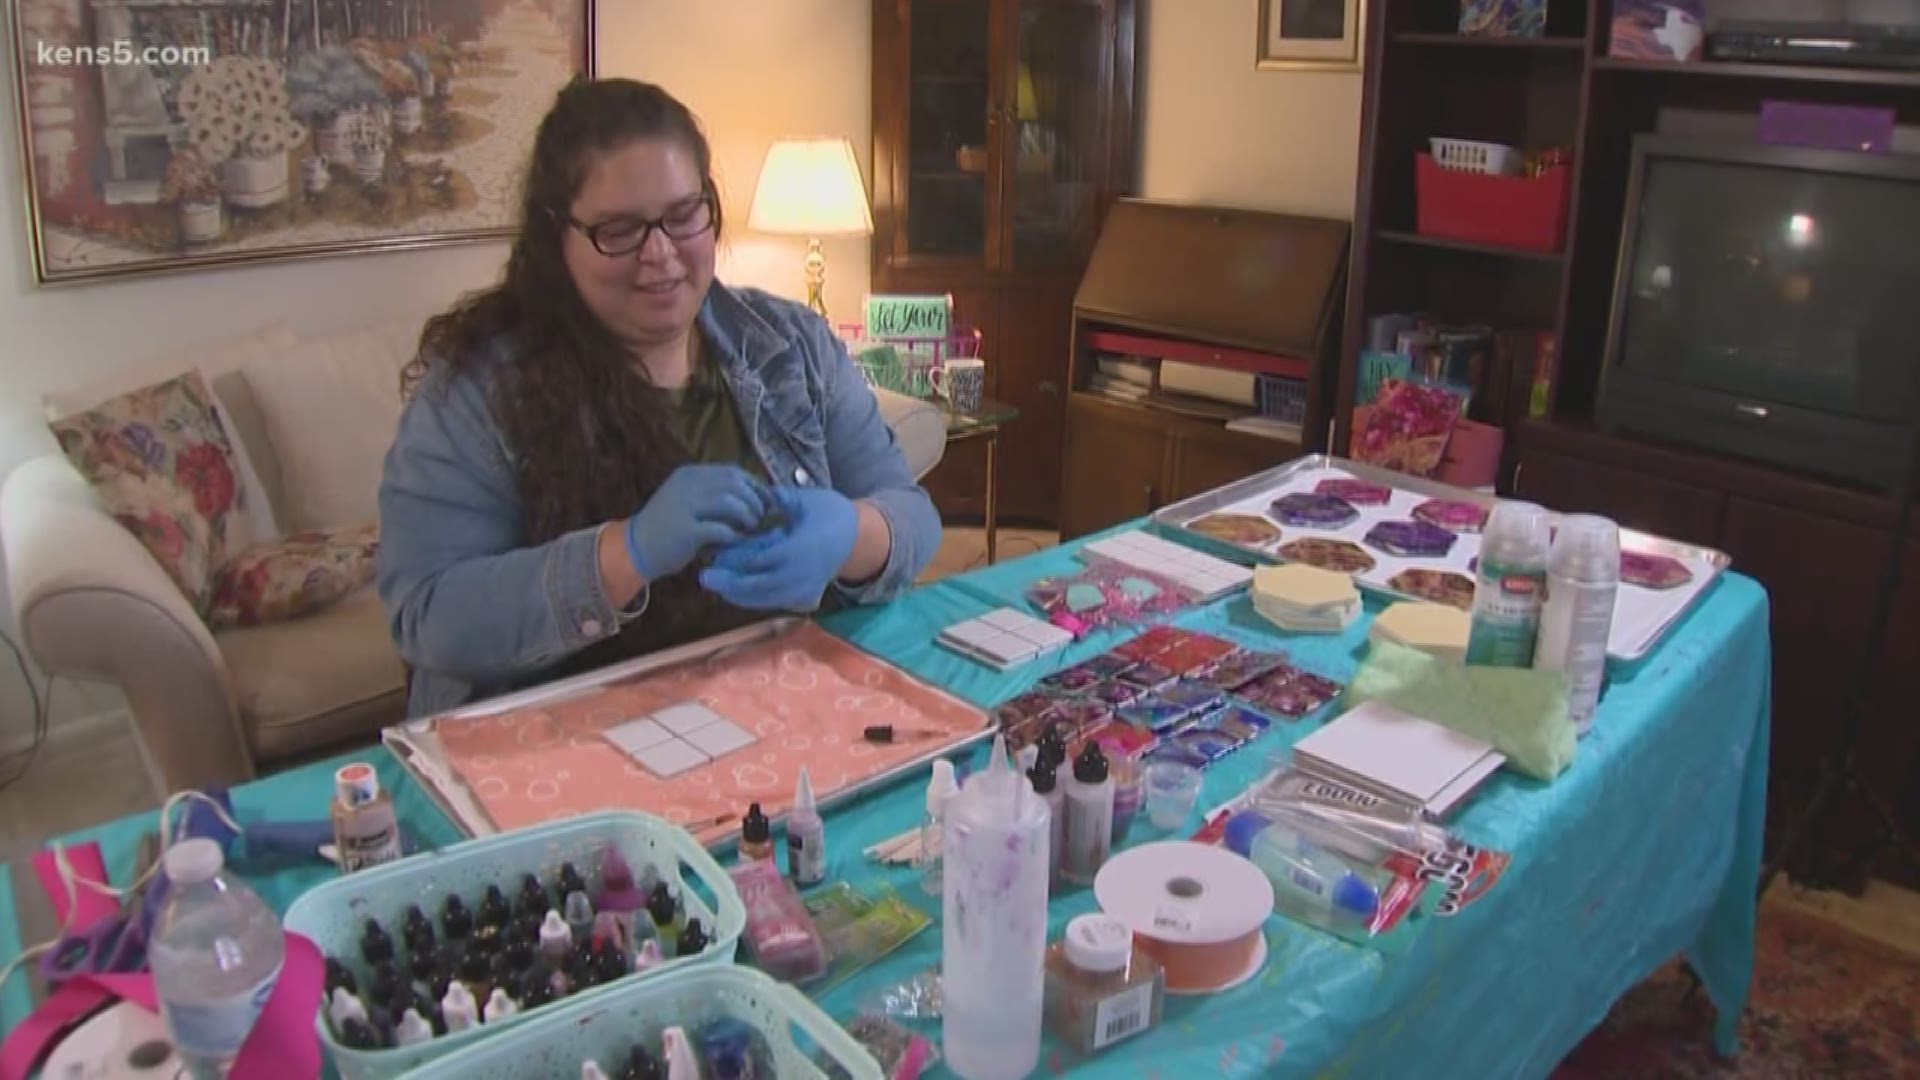 A local artist creates words of inspiration dressed in a splash of color in today's Made in SA!